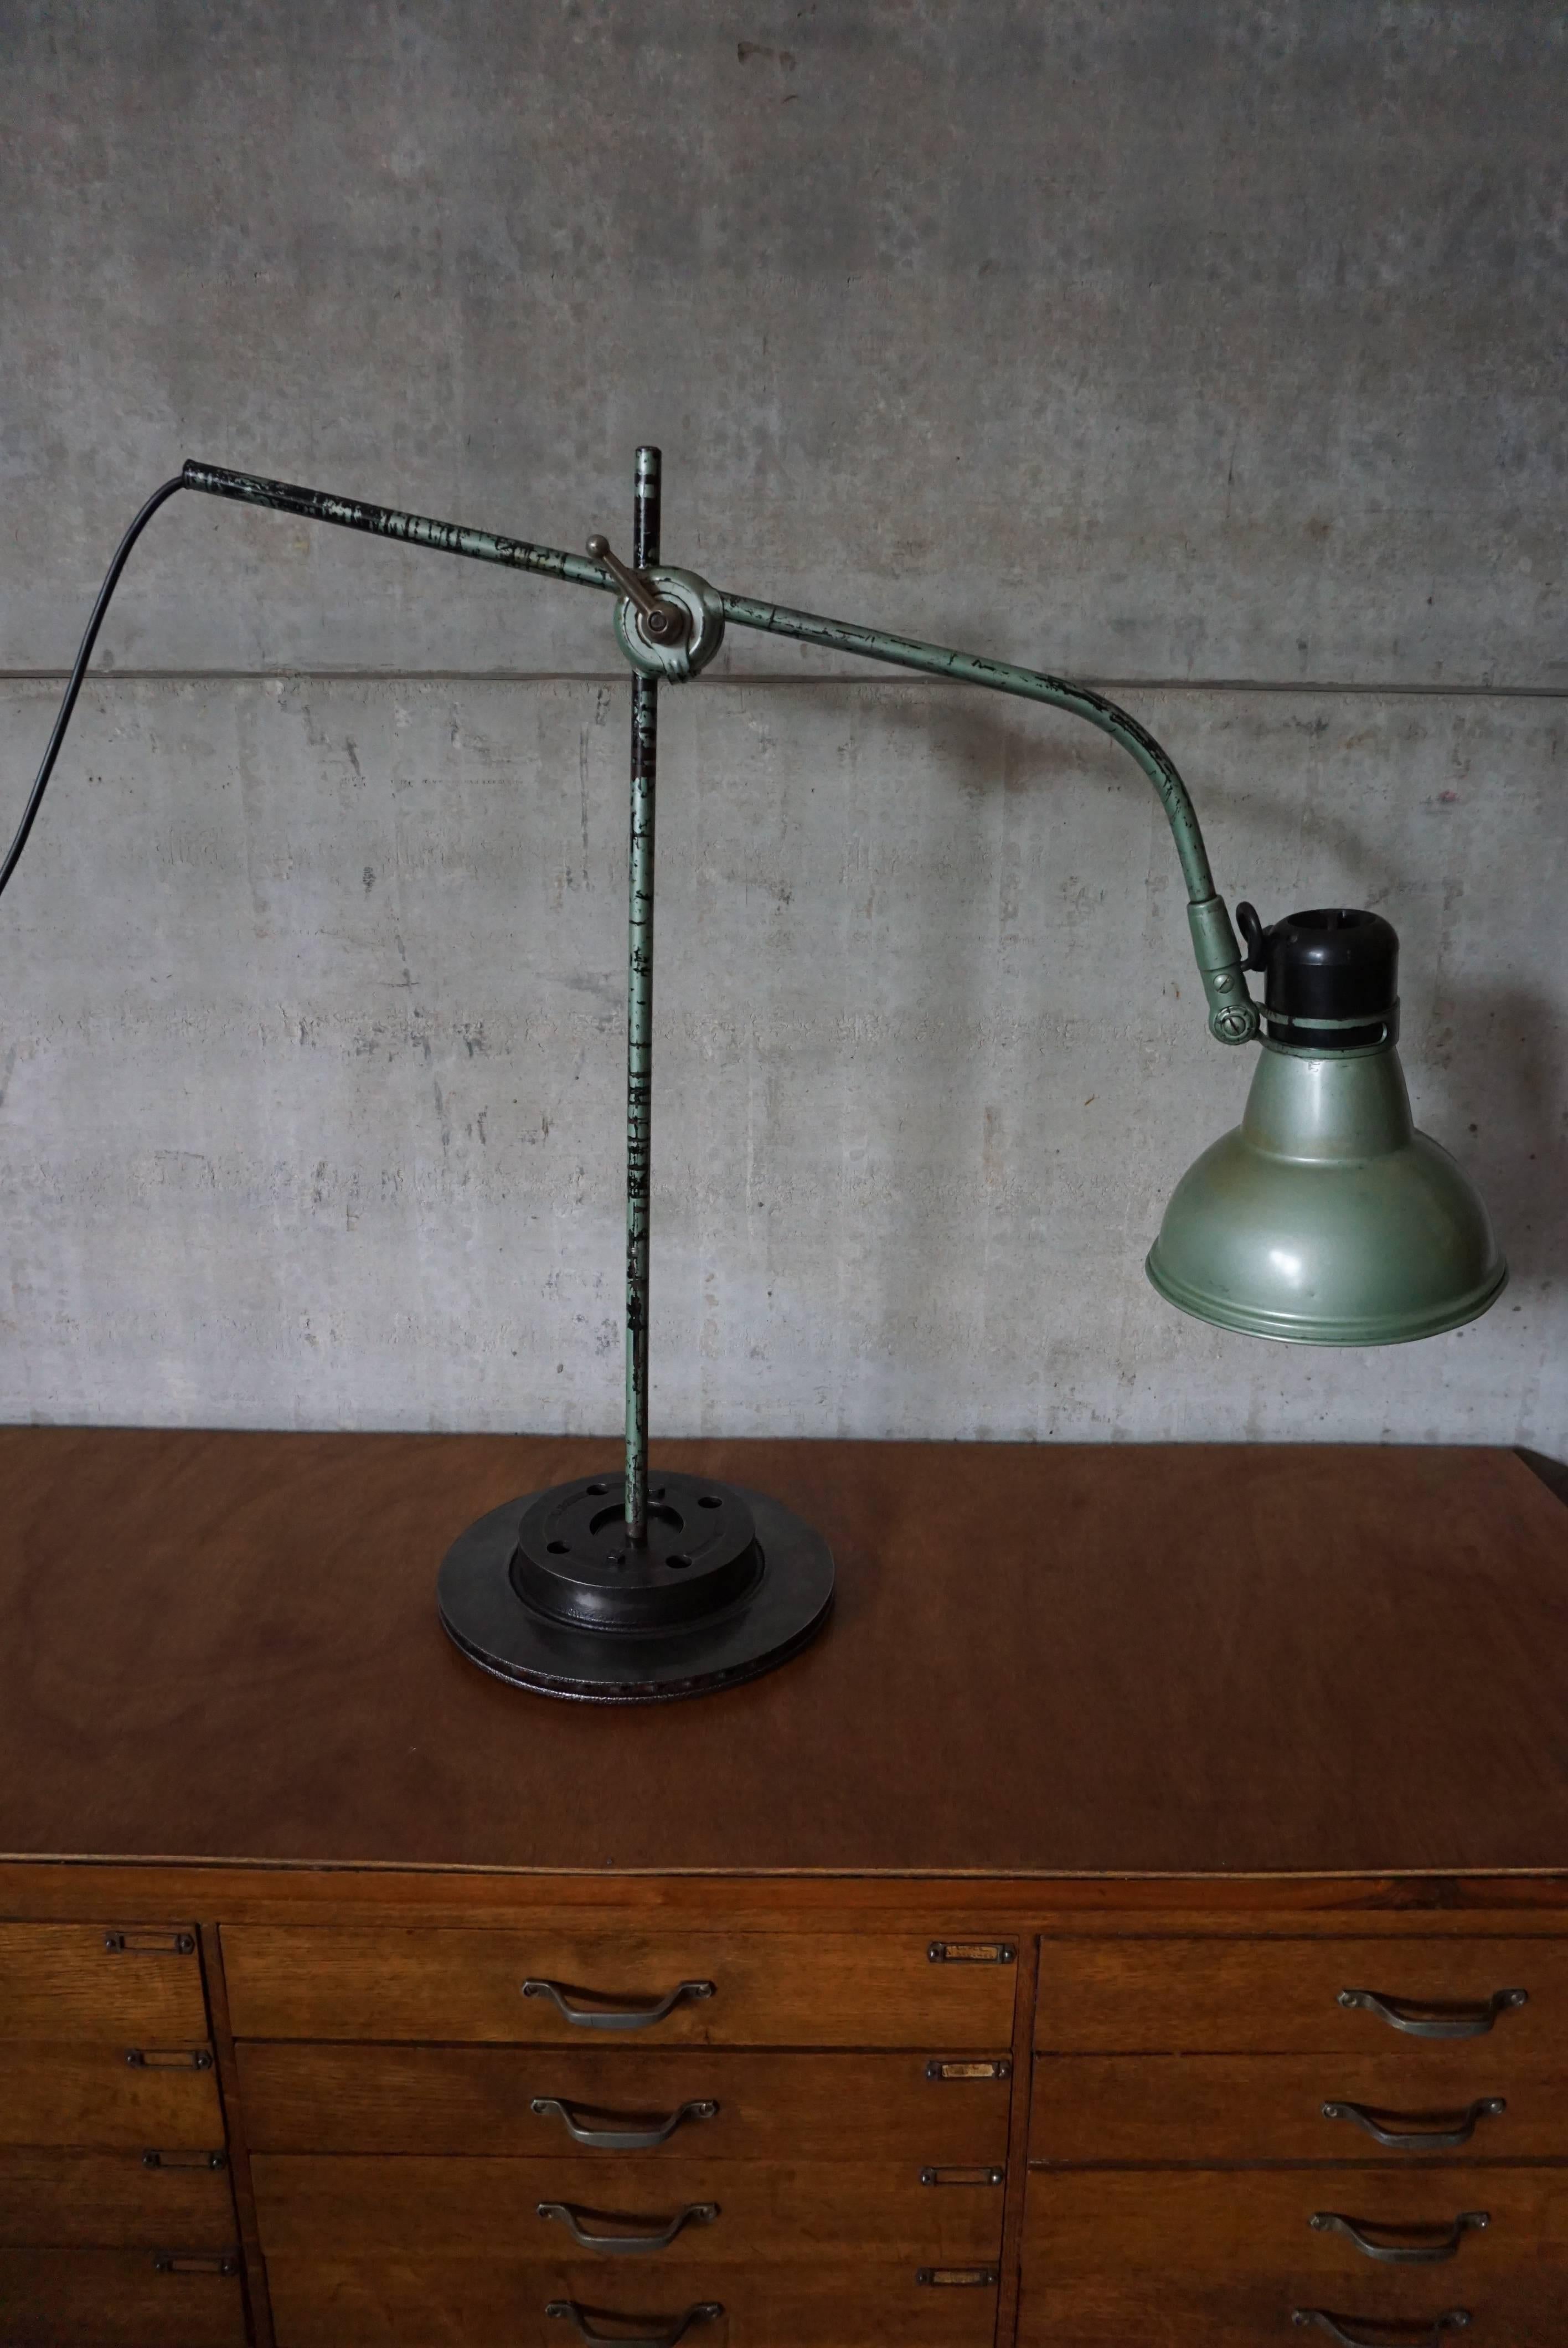 This industrial desk lamp was designed and manufactured by ERPE Belgium in the 1950s. It features a large, green lampshade mounted on a brake disk which is later added for stability. It is marked with the manufacturer's stamp and has been recently